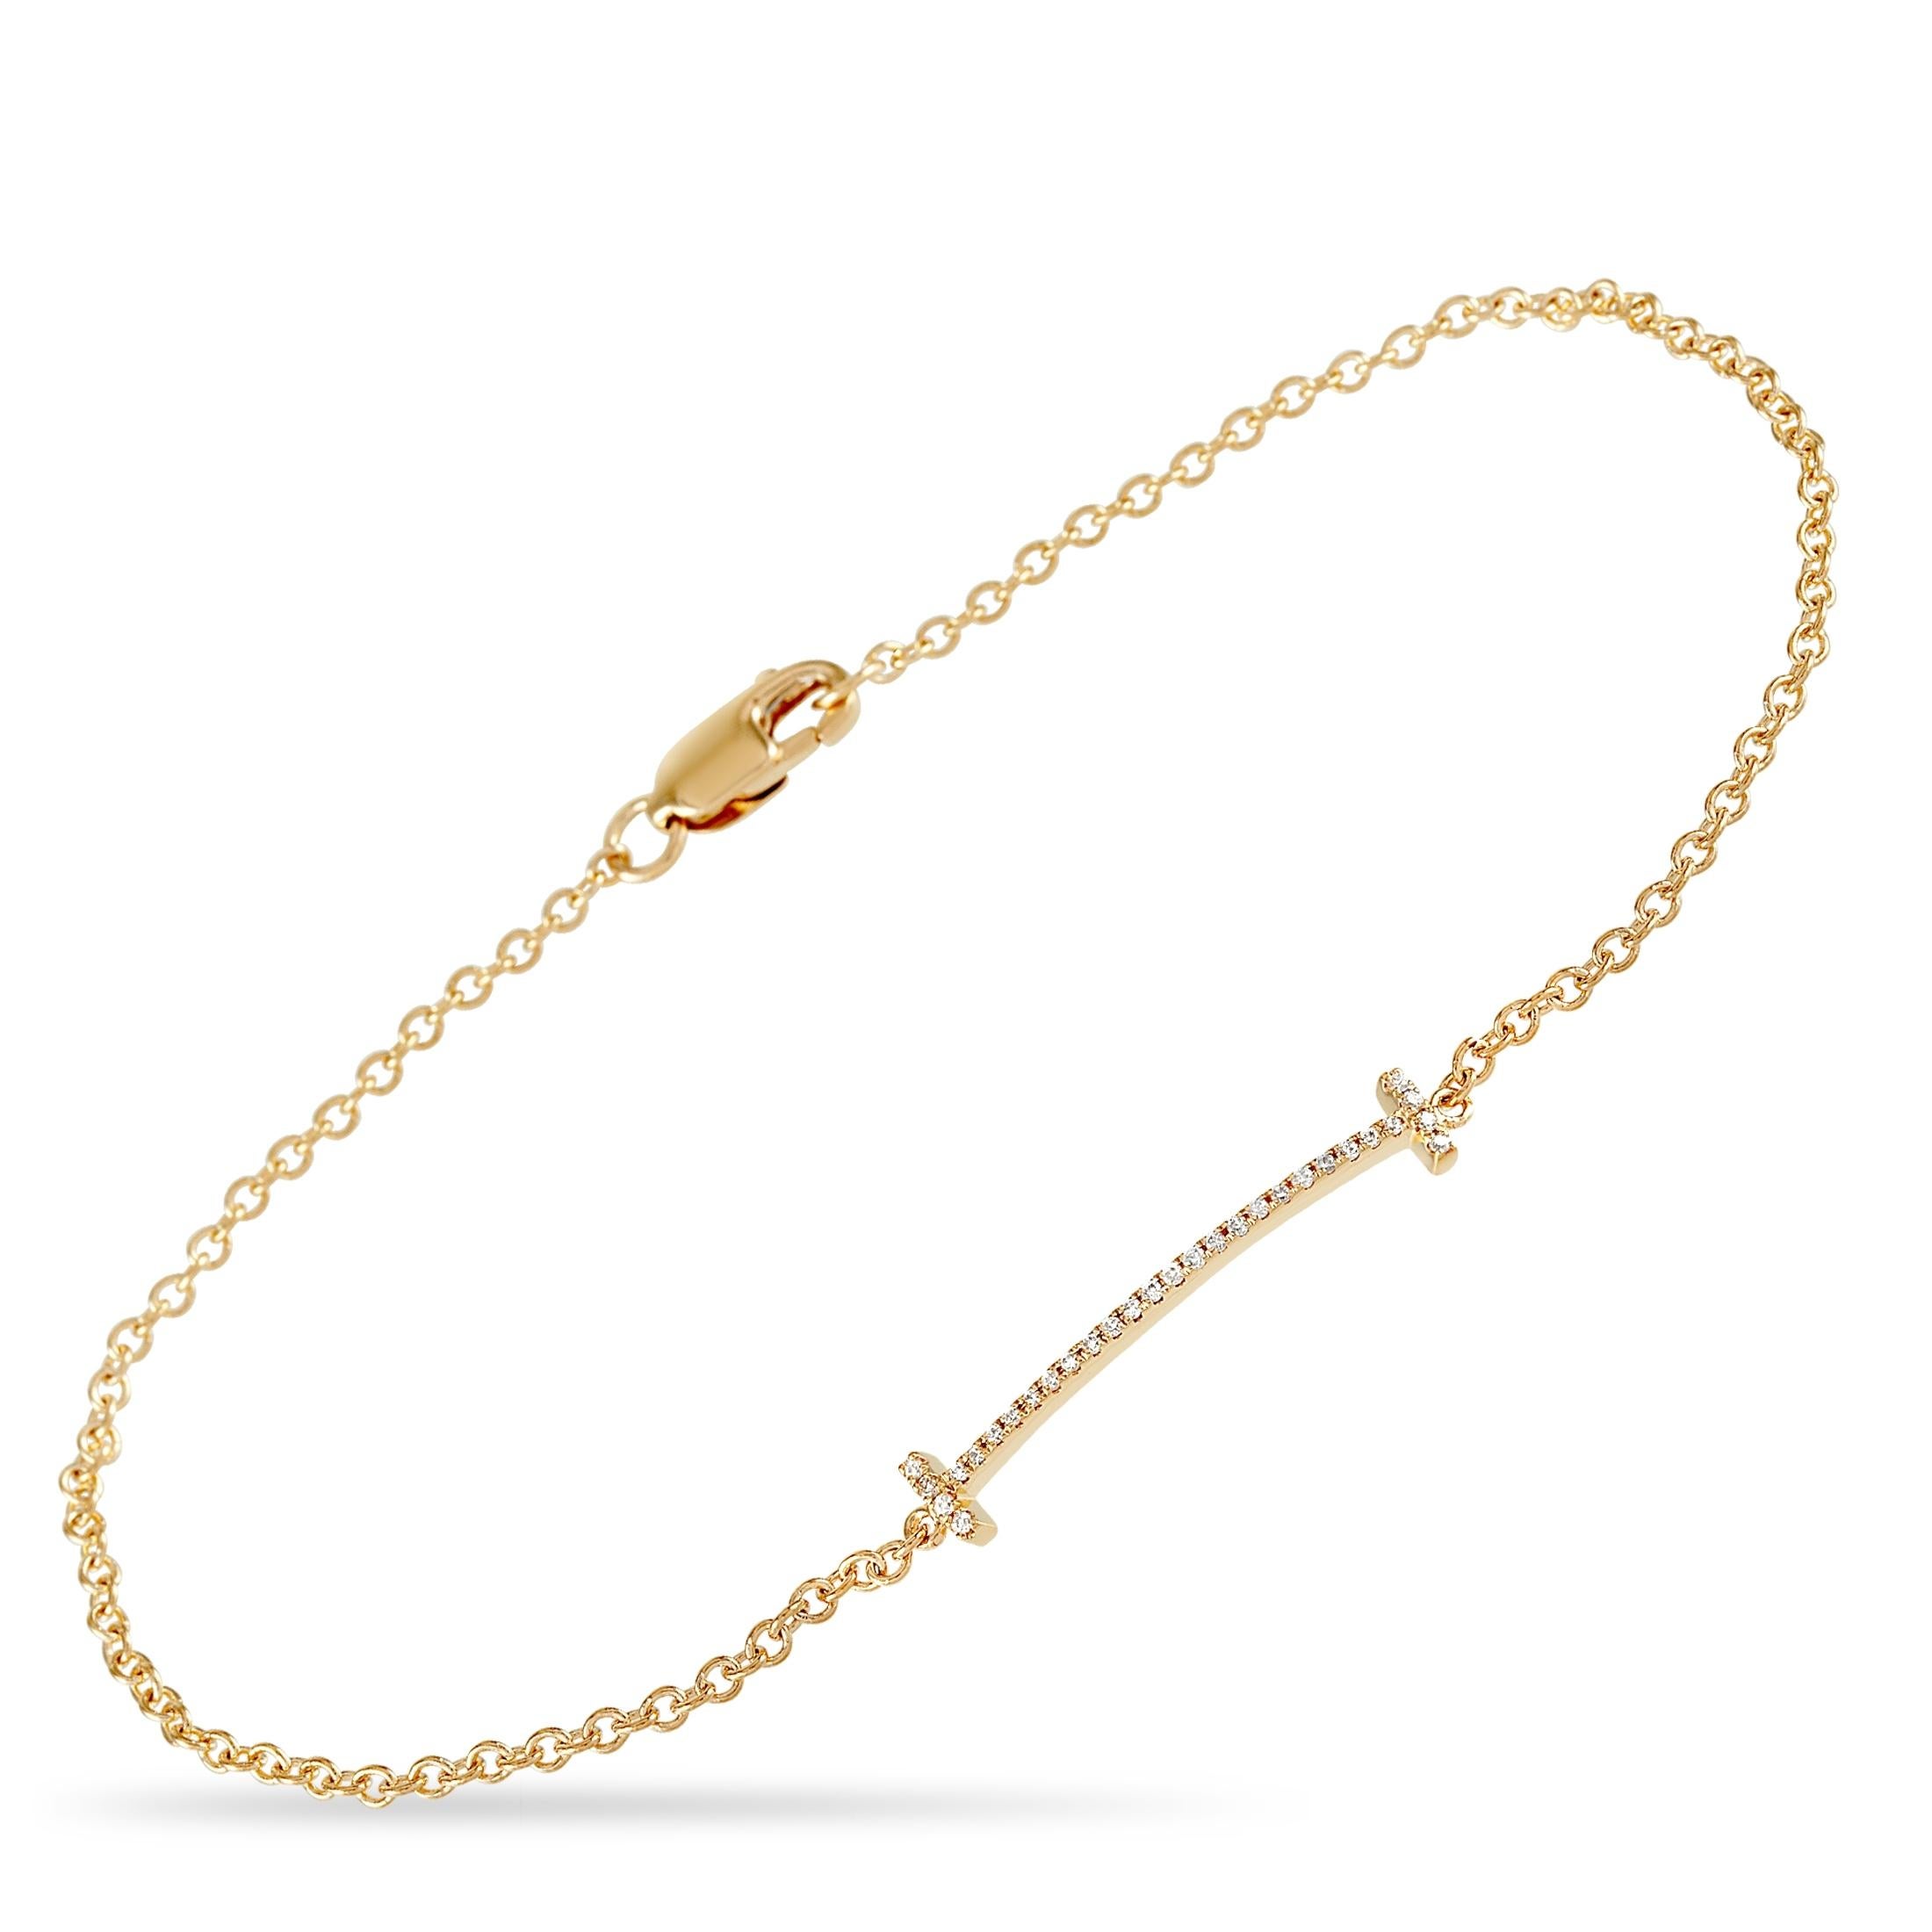 This LB Exclusive bracelet is made of 14K yellow gold and embellished with diamonds that amount to 0.10 carats. The bracelet weighs 1.4 grams and measures 6.50” in length.

Offered in brand-new condition, this jewelry piece includes a gift box.